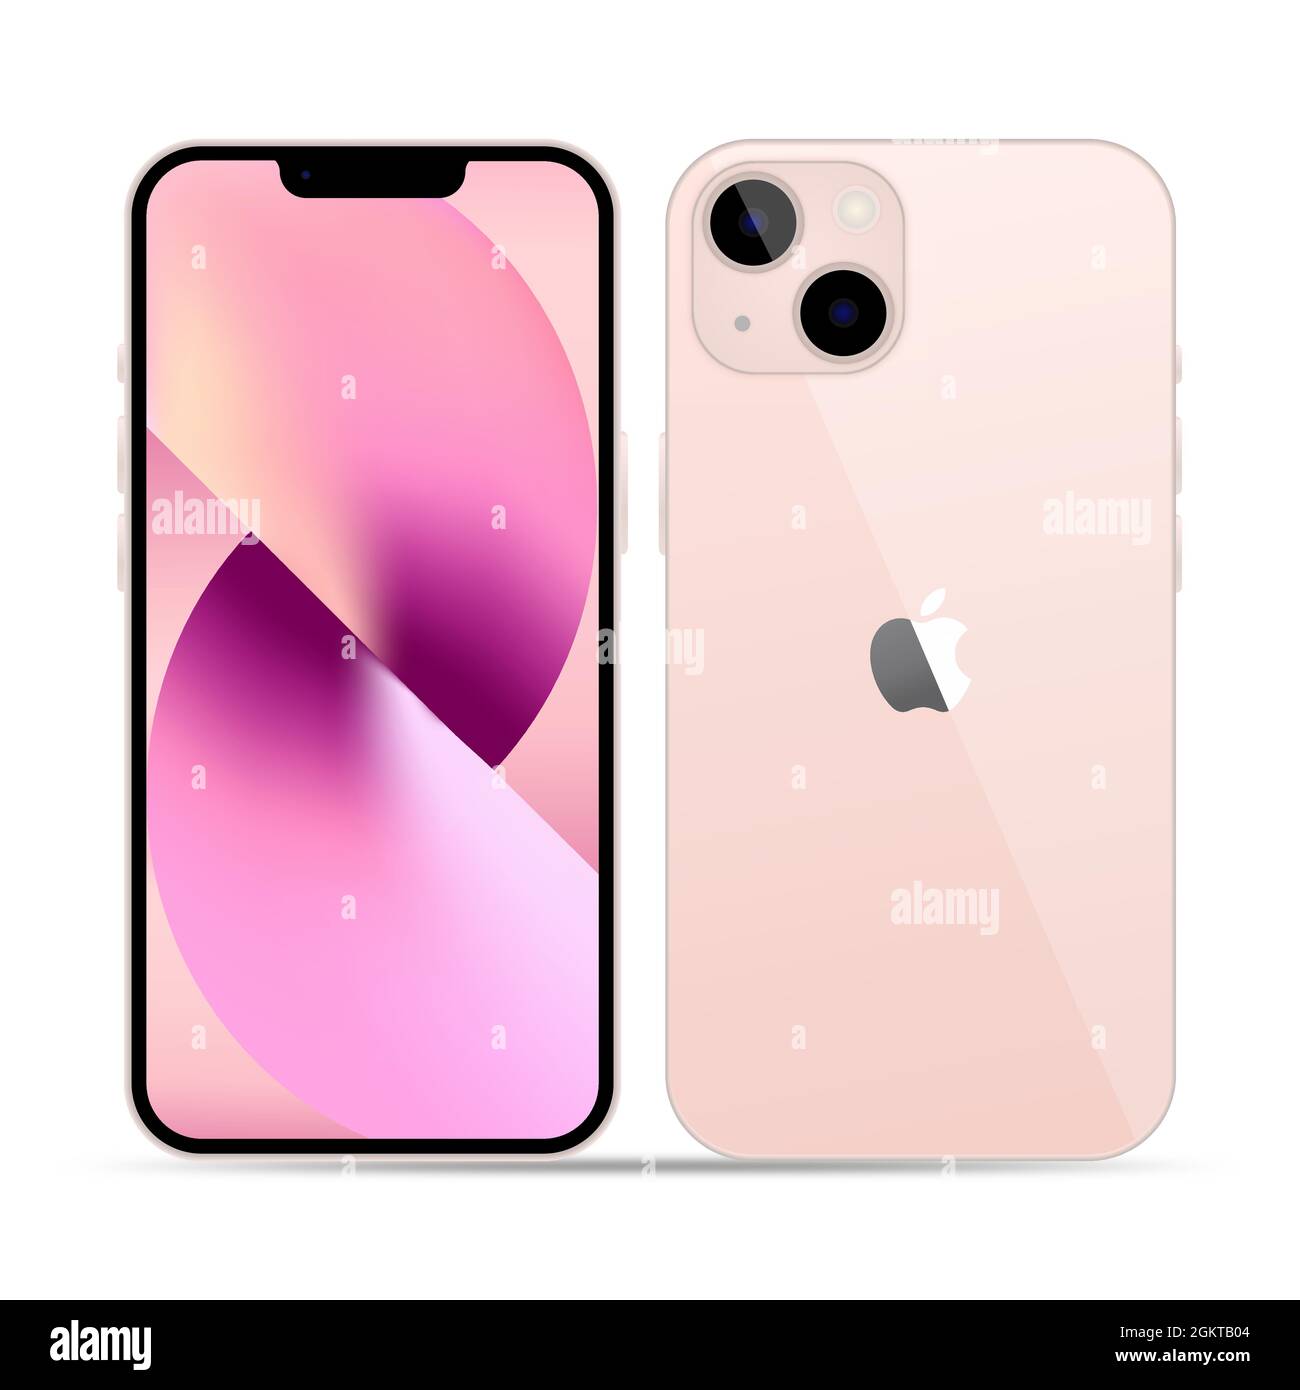 Vinnytsia, Ukraine - September 15, 2021. Apple iPhone 13 Pink Color. Apple iPhone 12 Pro or Pro Max in graphite color. Mock-up screen front view iphon Stock Vector